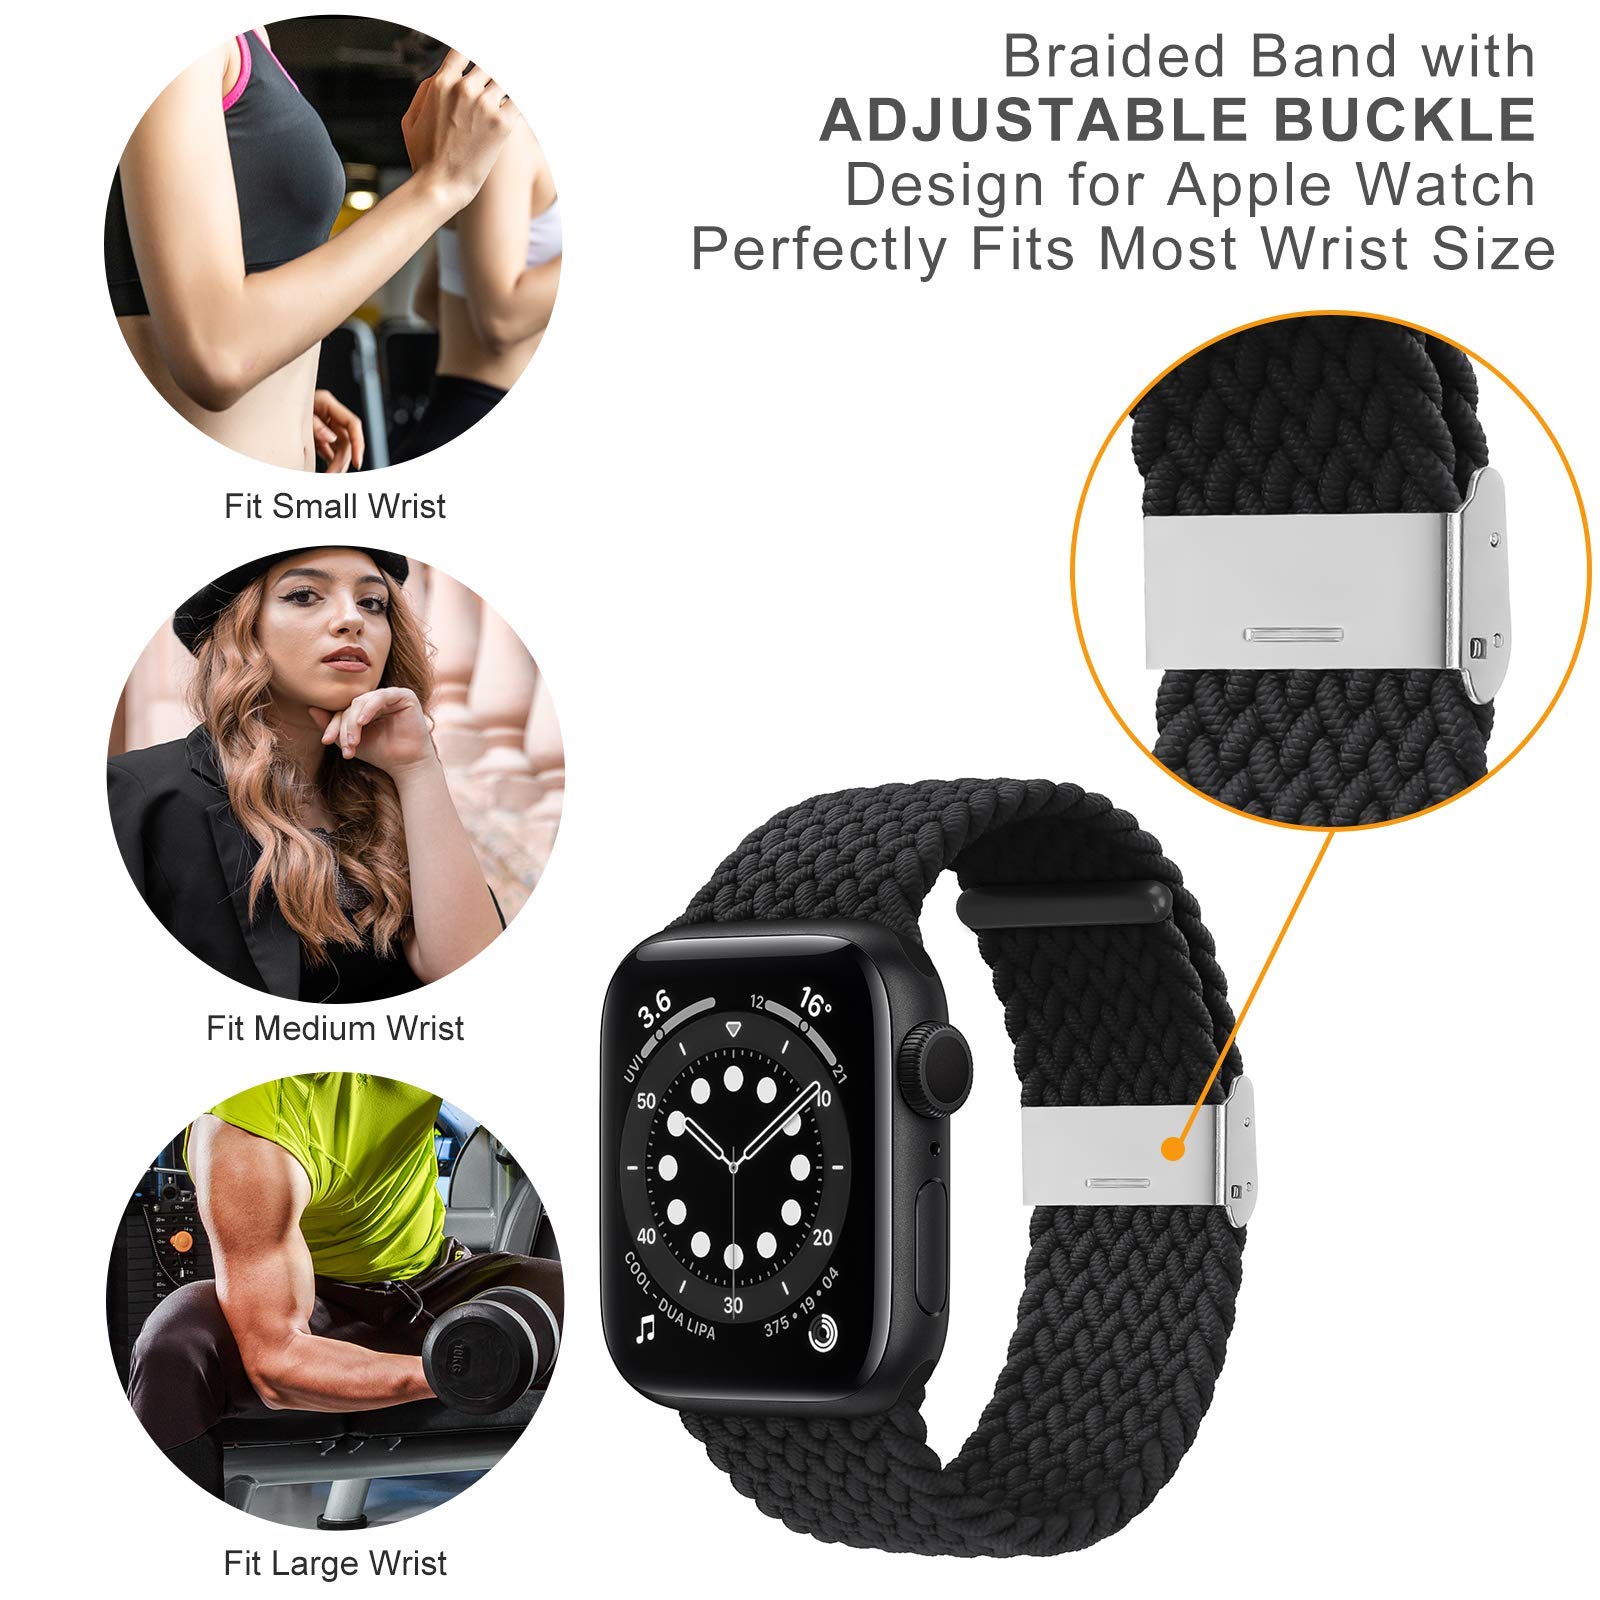 Bandiction Compatible with Apple Watch Bands 40mm 38mm, iWatch Bands for Women Men, Adjustable Braided Solo Loop with Buckle Elastic Sport Bands for iWatch SE Series 6/5/4/3/2/1, Pack of 2…